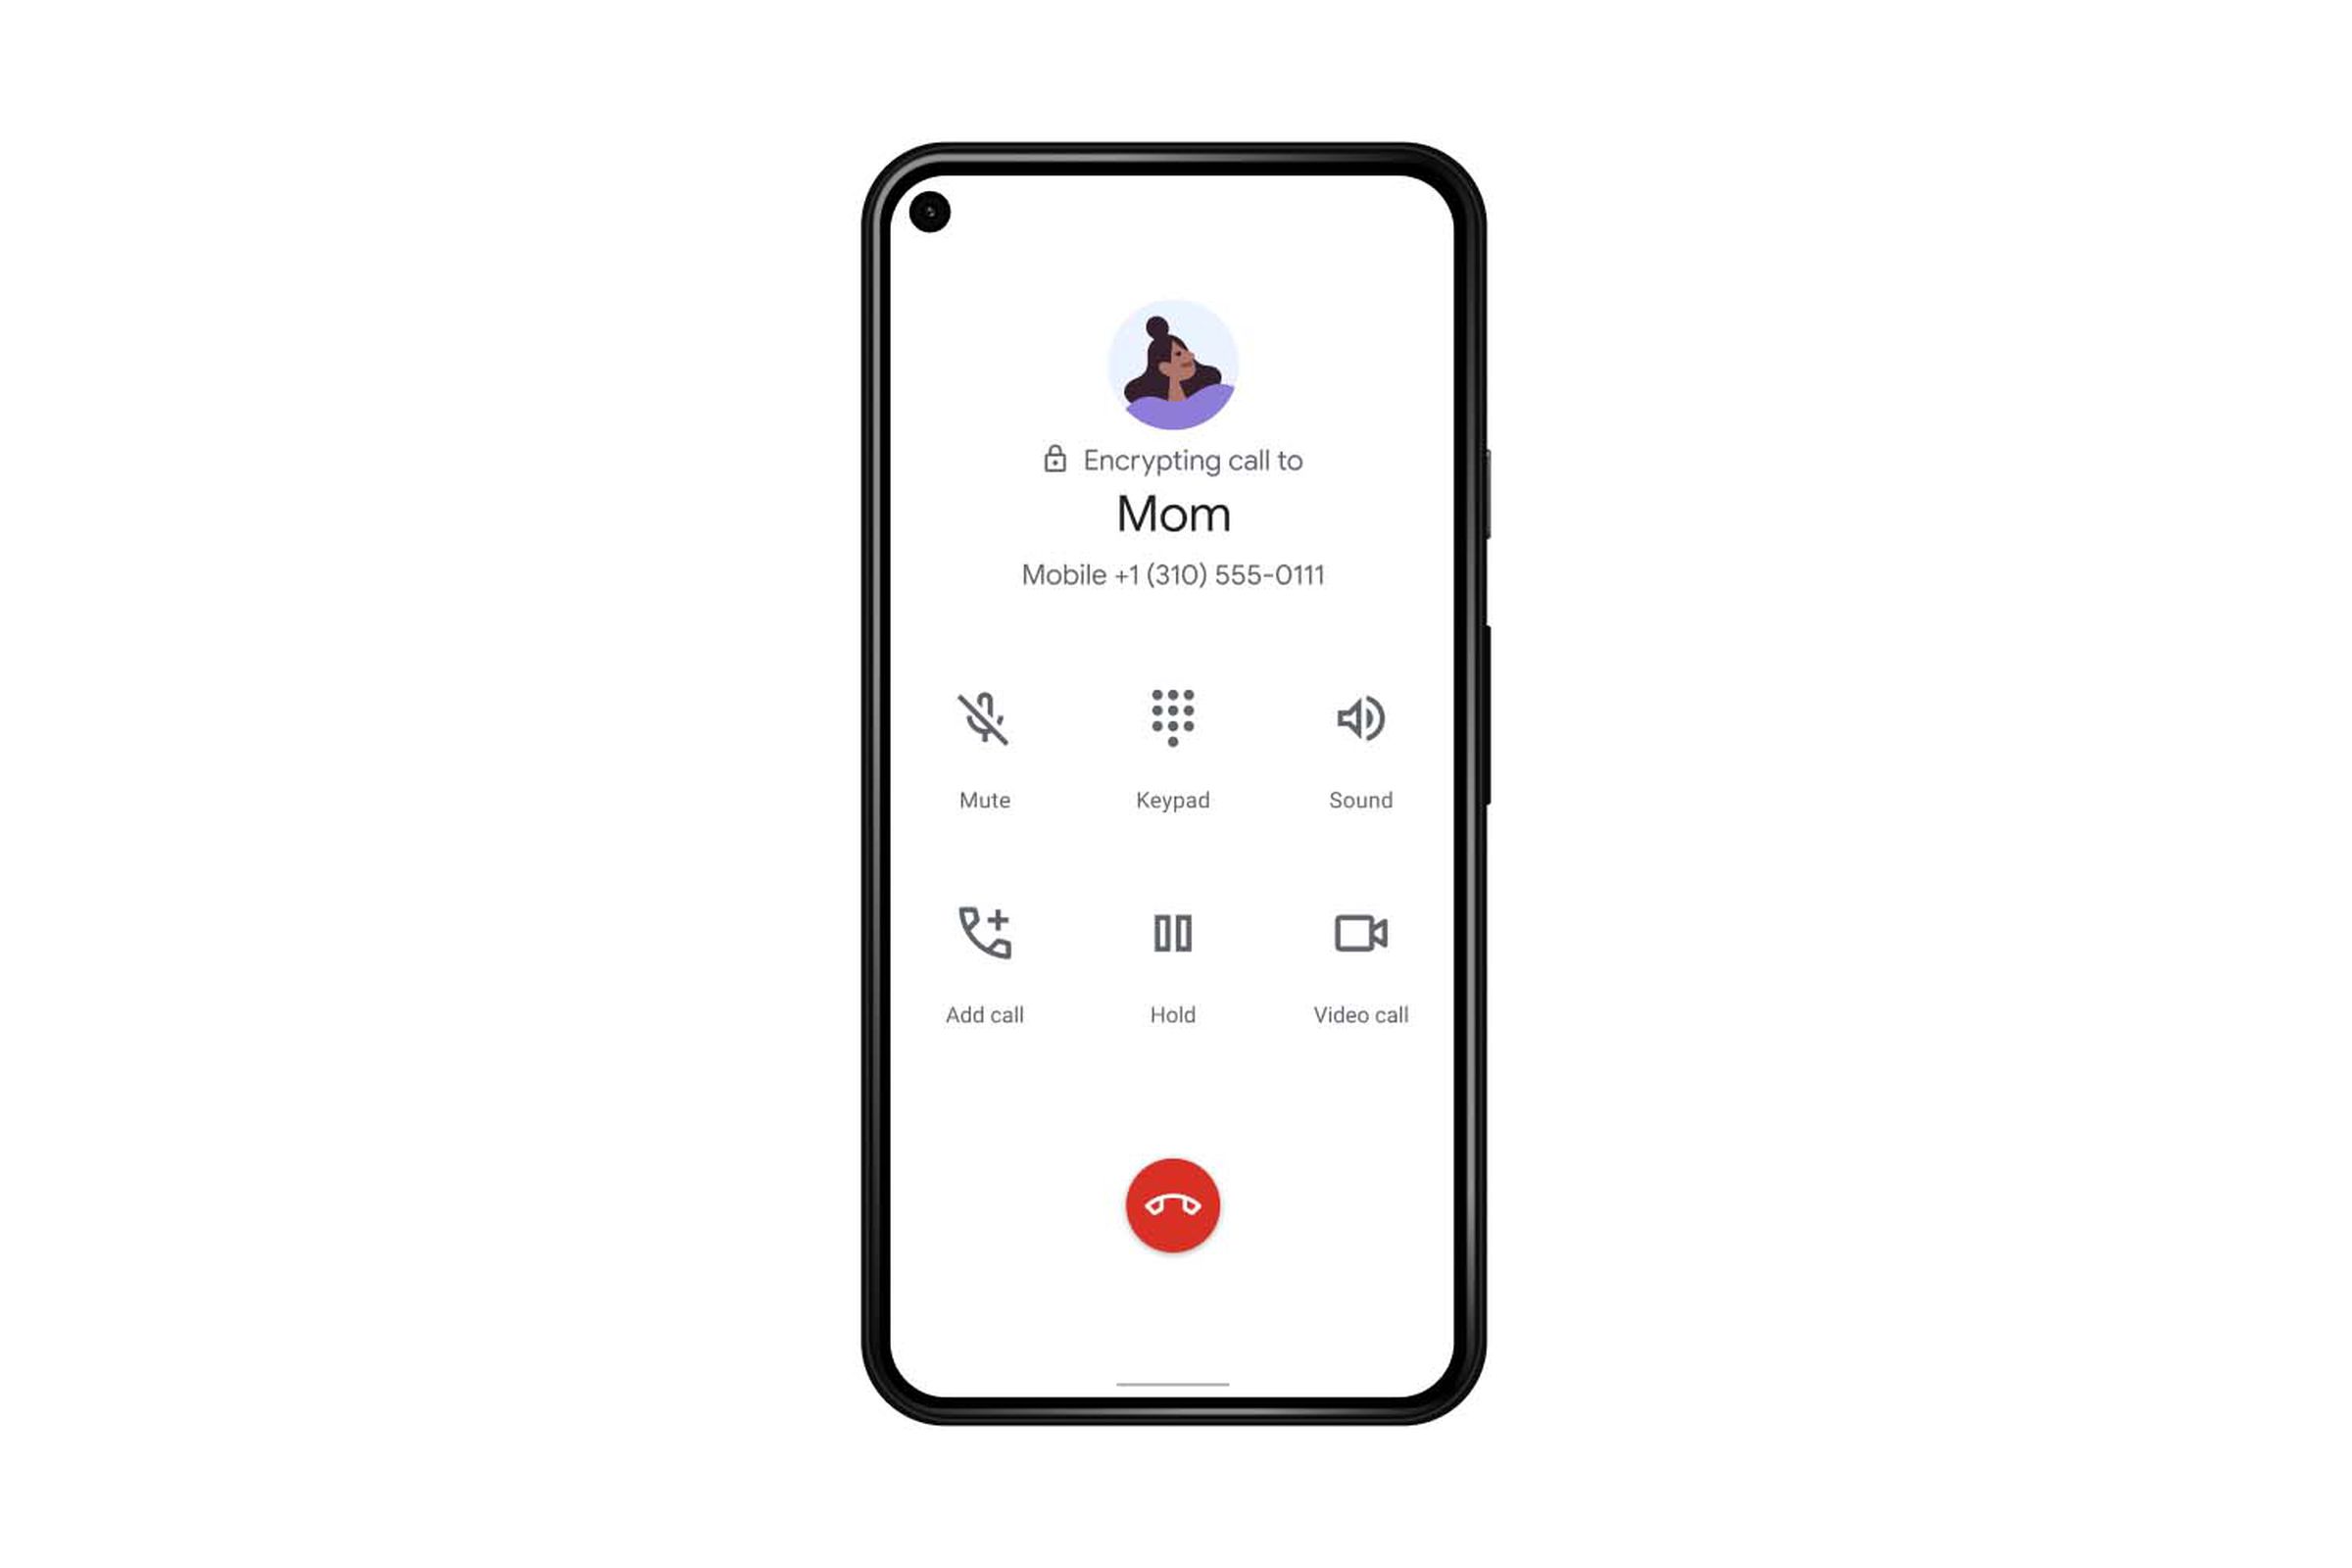 A lock icon will appear in the Phone app when a call is end-to-end encrypted.